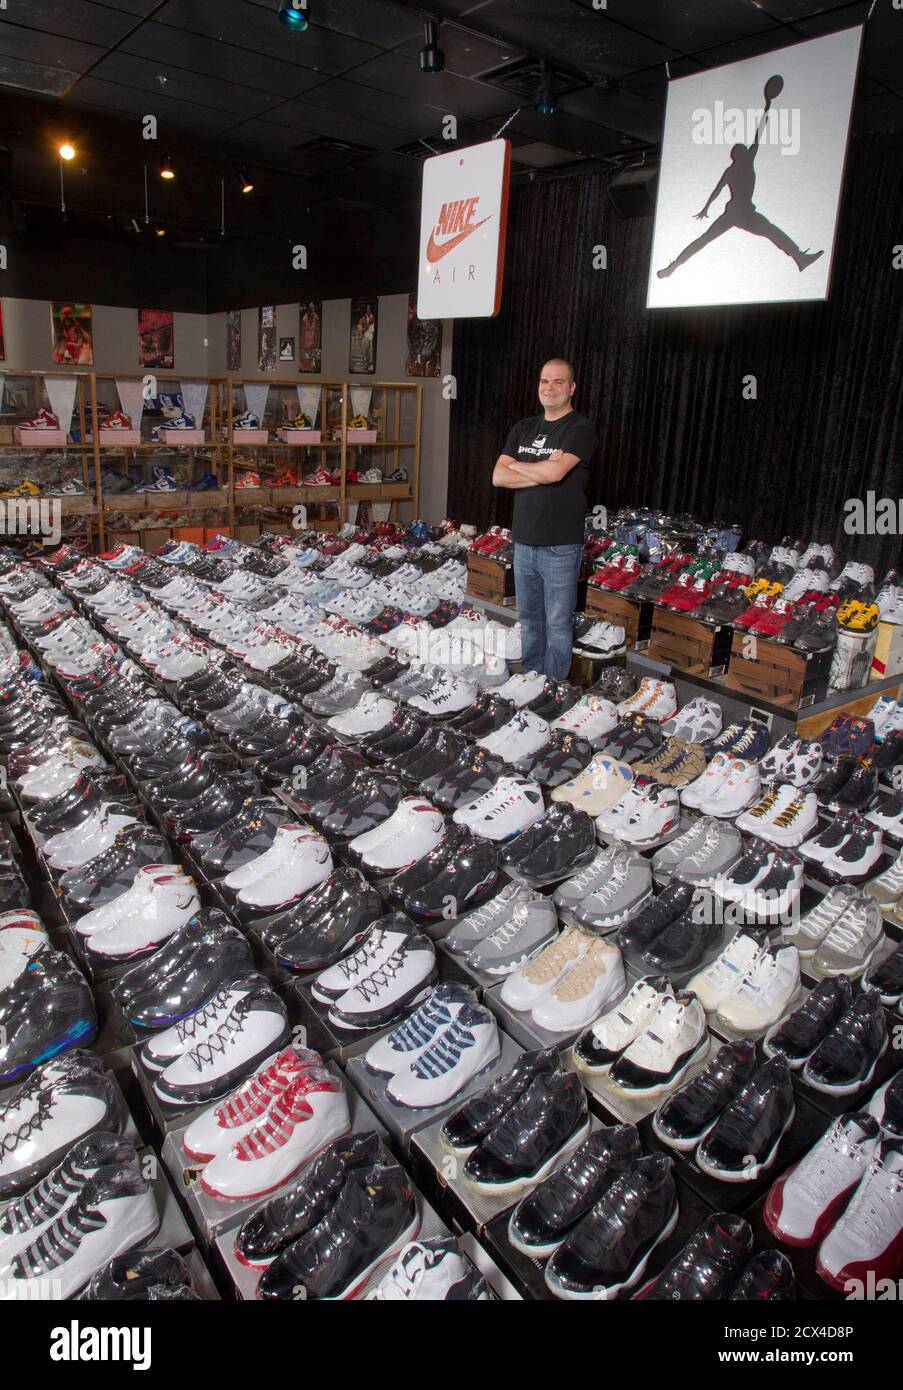 Jordan Michael Geller poses with his collection of Air Jordan Retro line at the "ShoeZeum" in downtown Las Vegas, Nevada September 25, 2012. Record keepers at the Guinness Book of